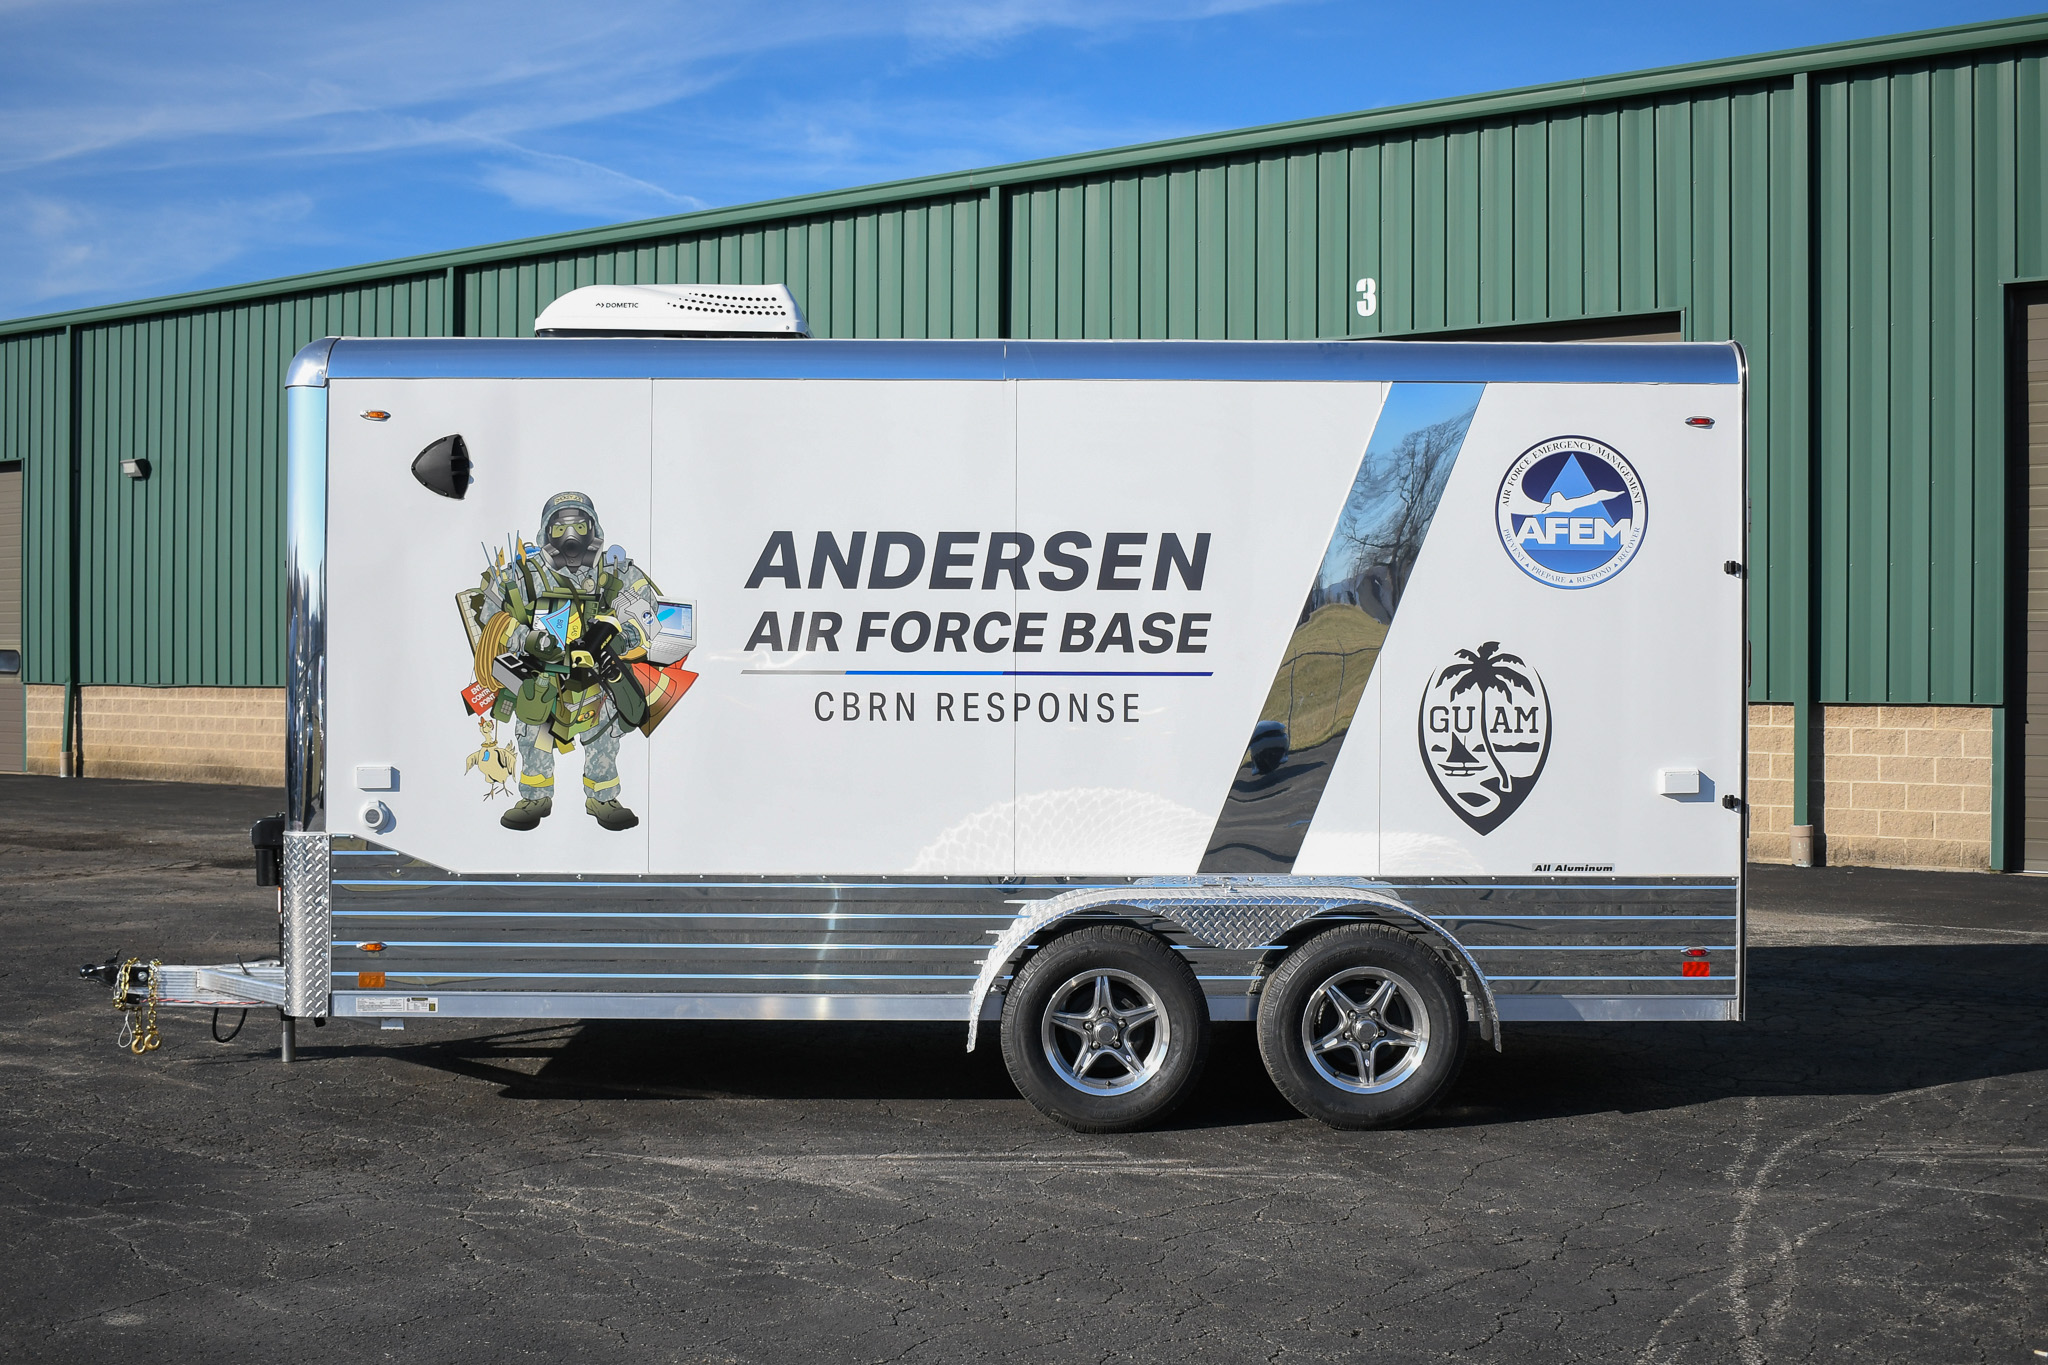 A side view of the unit for the Anderson AFB in Guam.